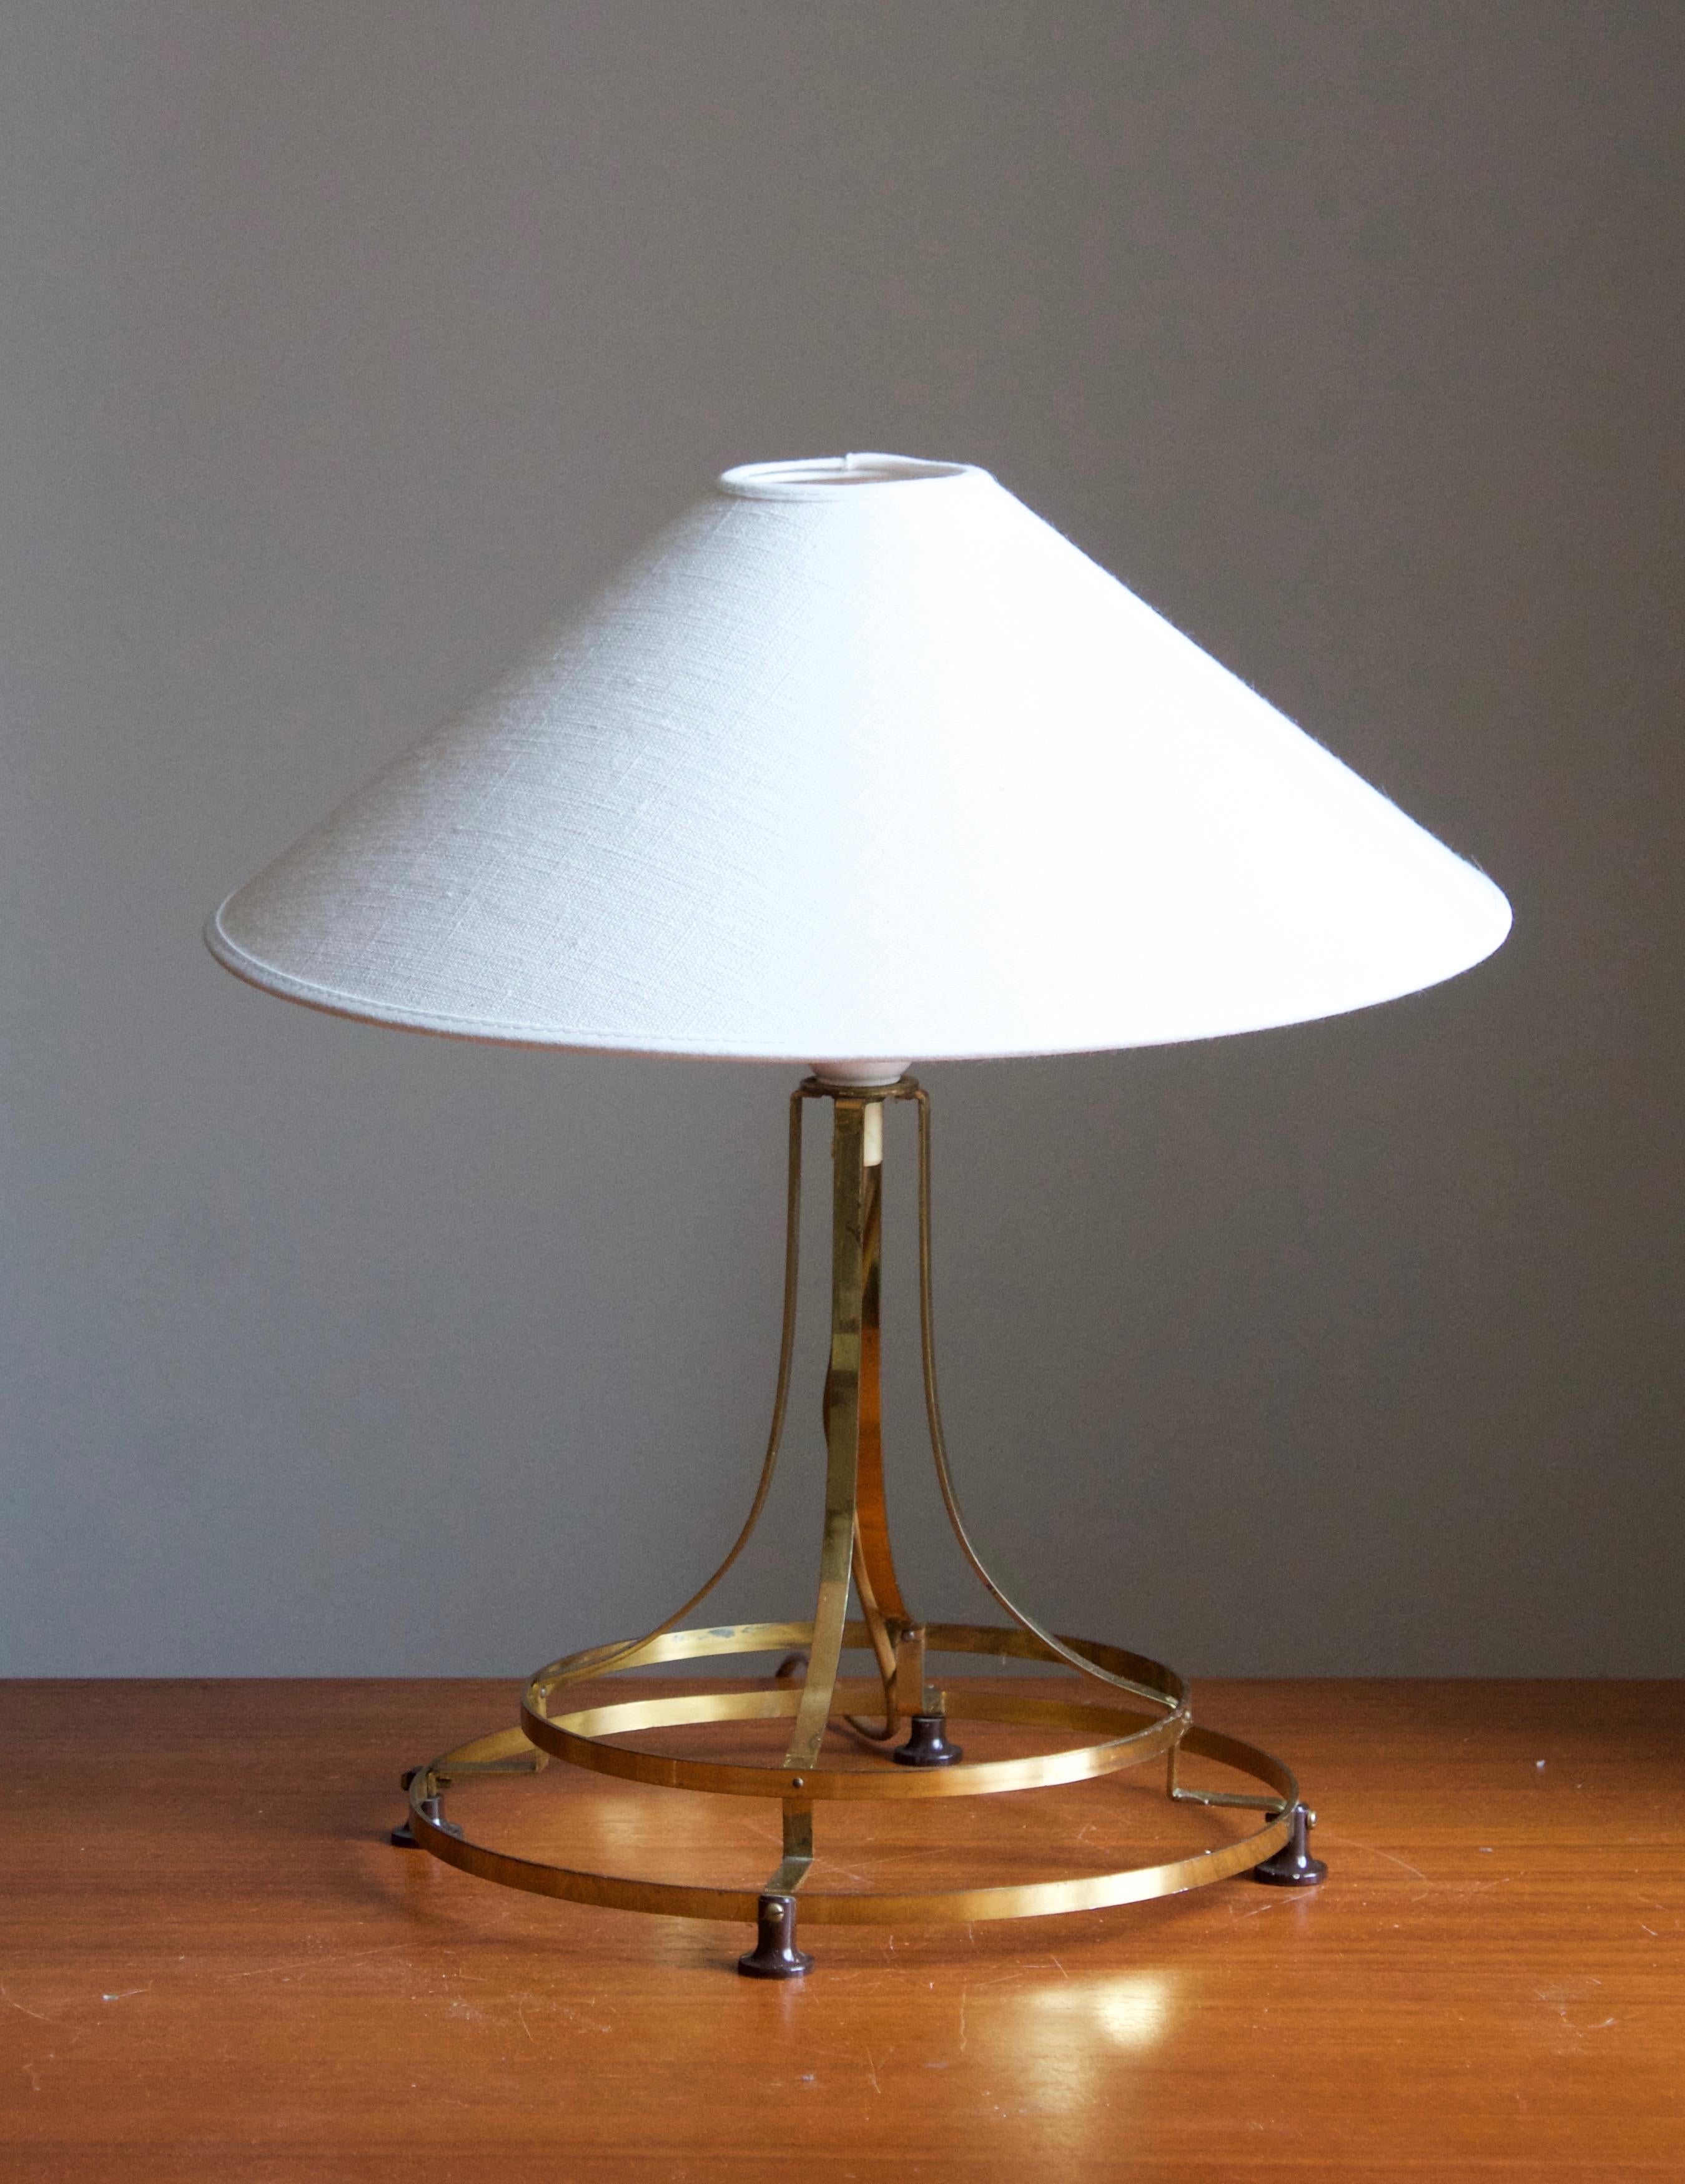 A pair of table lamps. Designed and produced in Sweden, circa 1960s-1970s.

Stated dimensions exclude lampshade, height includes socket. Sold without lampshades.